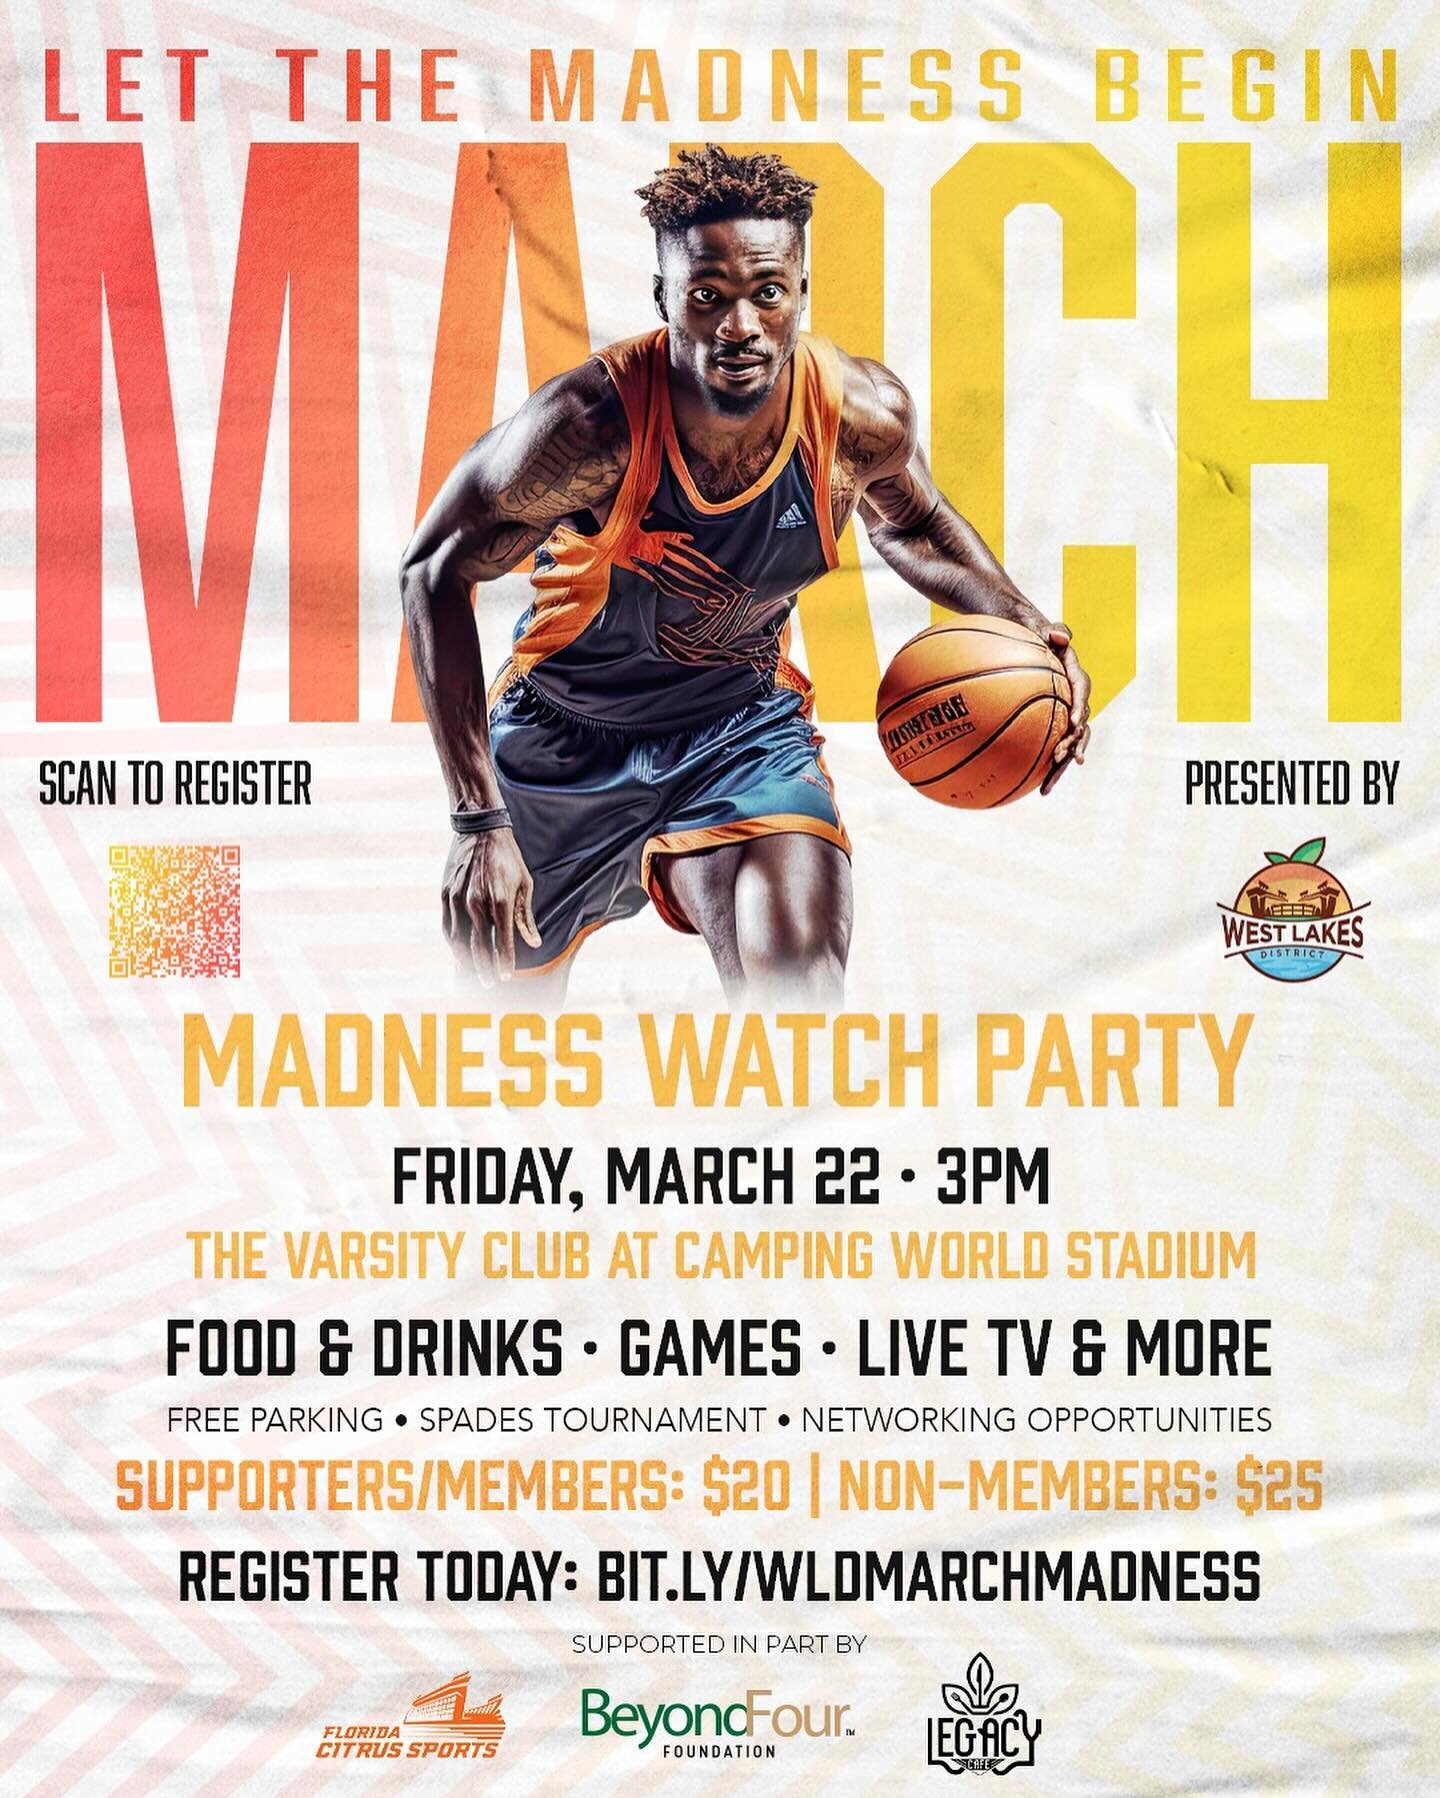 LET THE MADNESS BEGIN!! Join us alongside @westlakesdistrict for the March Madness Watch Party on Friday, March 22nd starting at 3pm at @varsitycluborlando! Lock in your tickets today and help support @westlakesdistrict

Tickets: bit.ly/wldmarchmadne